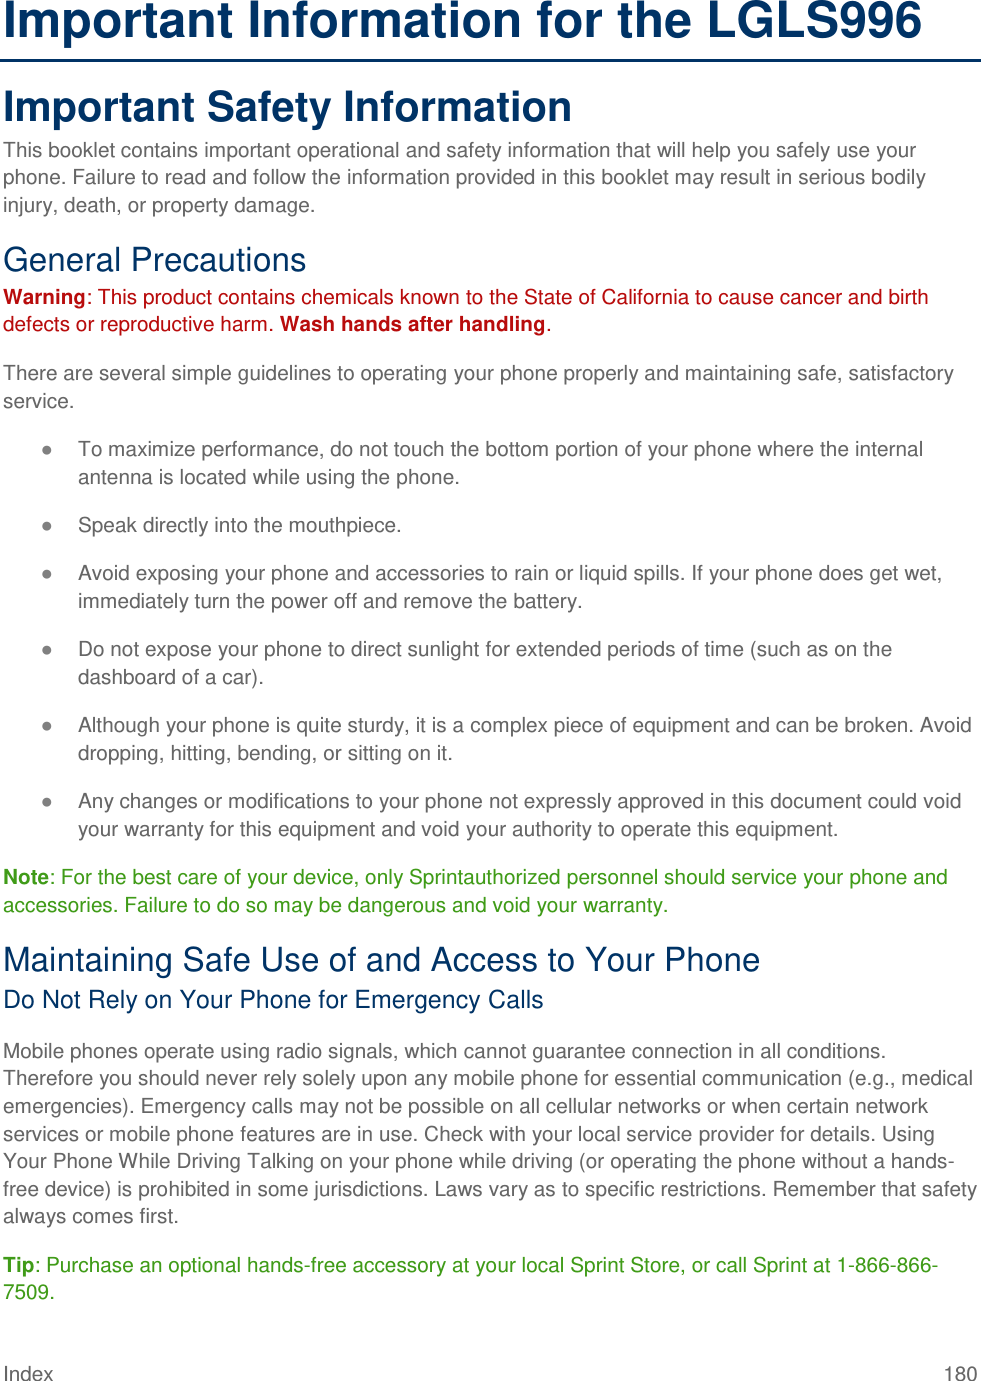 Index 180 Important Information for the LGLS996 Important Safety Information This booklet contains important operational and safety information that will help you safely use your phone. Failure to read and follow the information provided in this booklet may result in serious bodily injury, death, or property damage. General Precautions Warning: This product contains chemicals known to the State of California to cause cancer and birth defects or reproductive harm. Wash hands after handling. There are several simple guidelines to operating your phone properly and maintaining safe, satisfactory service. ● To maximize performance, do not touch the bottom portion of your phone where the internal antenna is located while using the phone. ● Speak directly into the mouthpiece. ● Avoid exposing your phone and accessories to rain or liquid spills. If your phone does get wet, immediately turn the power off and remove the battery. ● Do not expose your phone to direct sunlight for extended periods of time (such as on the dashboard of a car). ● Although your phone is quite sturdy, it is a complex piece of equipment and can be broken. Avoid dropping, hitting, bending, or sitting on it. ● Any changes or modifications to your phone not expressly approved in this document could void your warranty for this equipment and void your authority to operate this equipment. Note: For the best care of your device, only Sprintauthorized personnel should service your phone and accessories. Failure to do so may be dangerous and void your warranty. Maintaining Safe Use of and Access to Your Phone Do Not Rely on Your Phone for Emergency Calls Mobile phones operate using radio signals, which cannot guarantee connection in all conditions. Therefore you should never rely solely upon any mobile phone for essential communication (e.g., medical emergencies). Emergency calls may not be possible on all cellular networks or when certain network services or mobile phone features are in use. Check with your local service provider for details. Using Your Phone While Driving Talking on your phone while driving (or operating the phone without a hands-free device) is prohibited in some jurisdictions. Laws vary as to specific restrictions. Remember that safety always comes first. Tip: Purchase an optional hands-free accessory at your local Sprint Store, or call Sprint at 1-866-866-7509. 